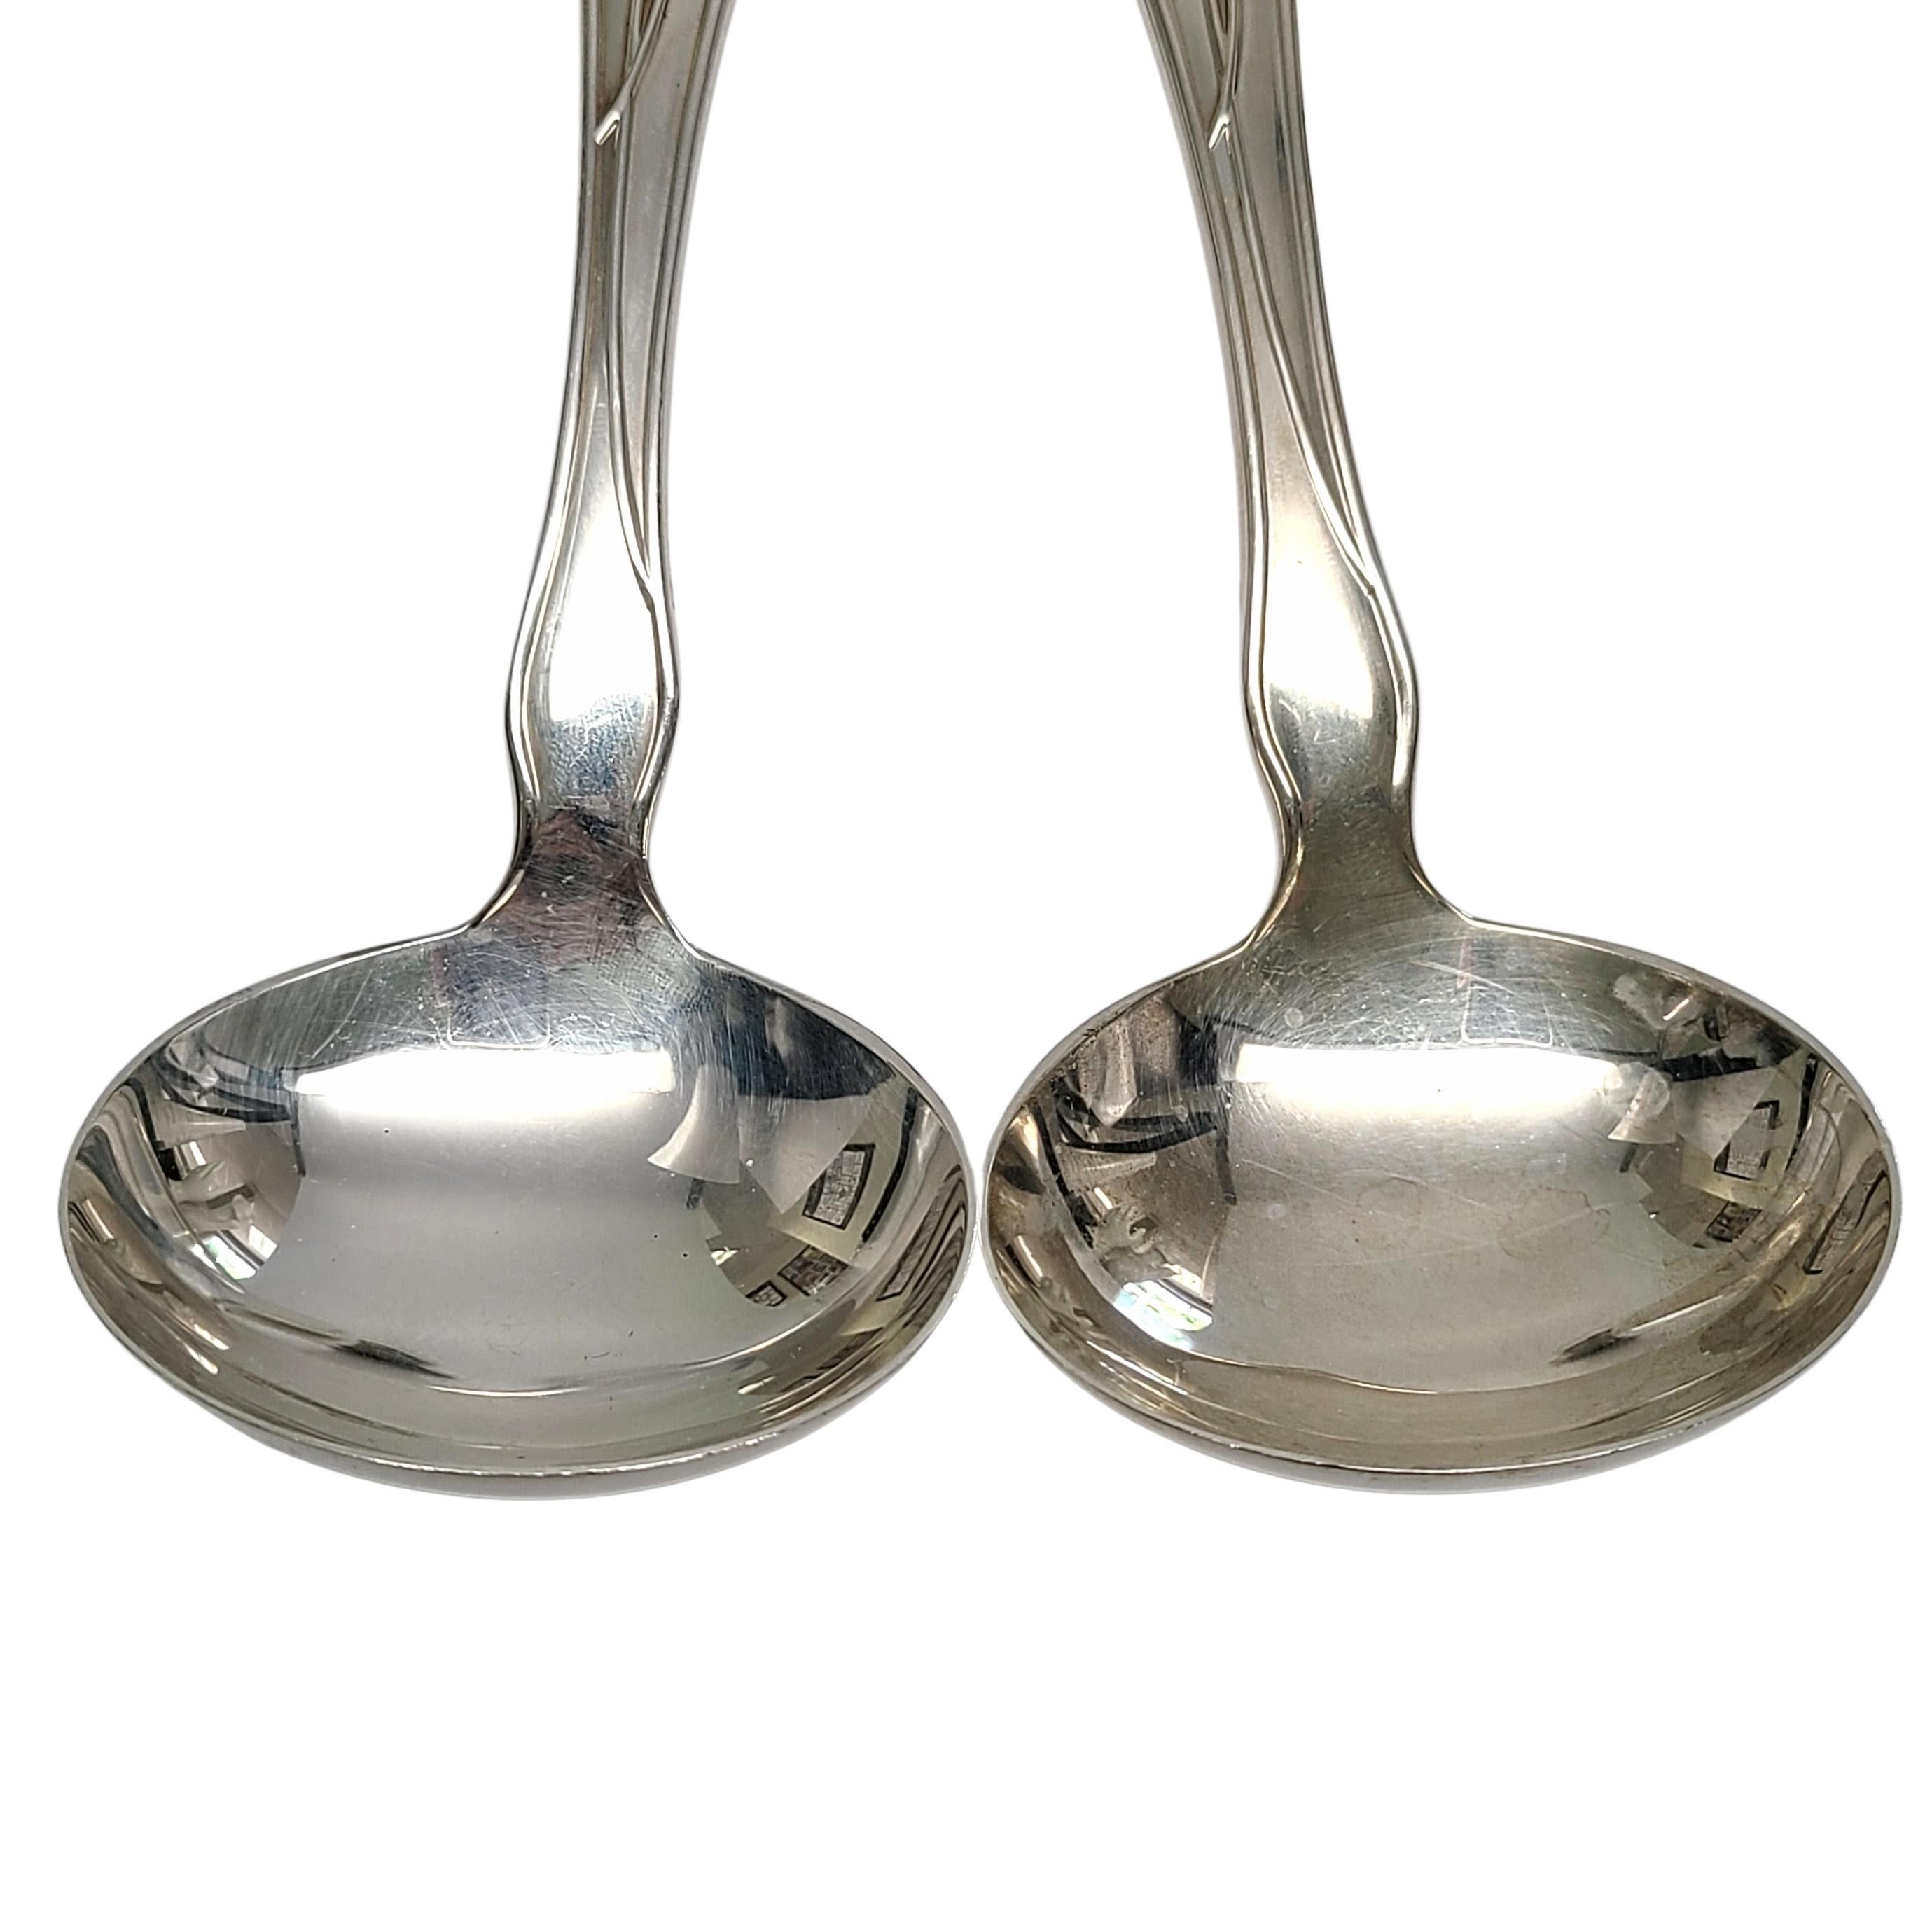 Set of 2 Tiffany & Co American Garden Sterling Silver Gravy Ladles with Pouches 1